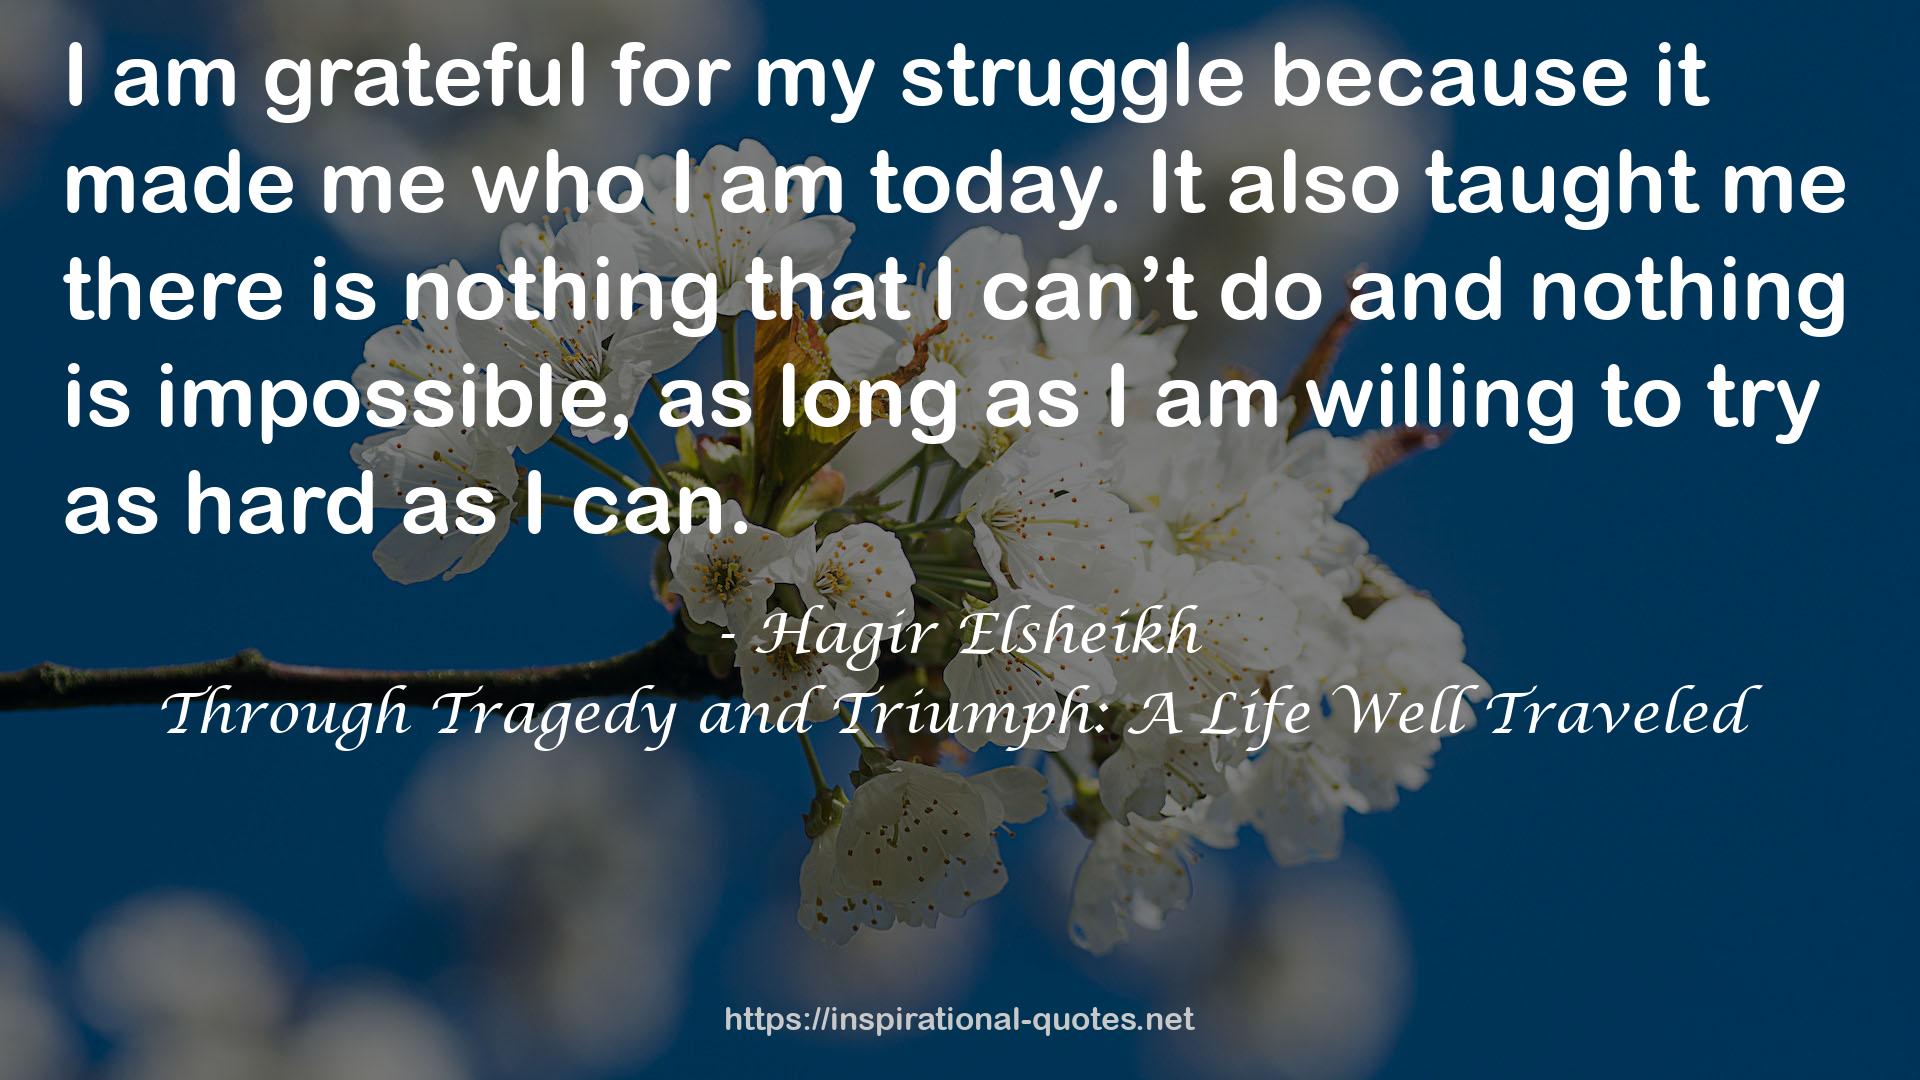 Through Tragedy and Triumph: A Life Well Traveled QUOTES